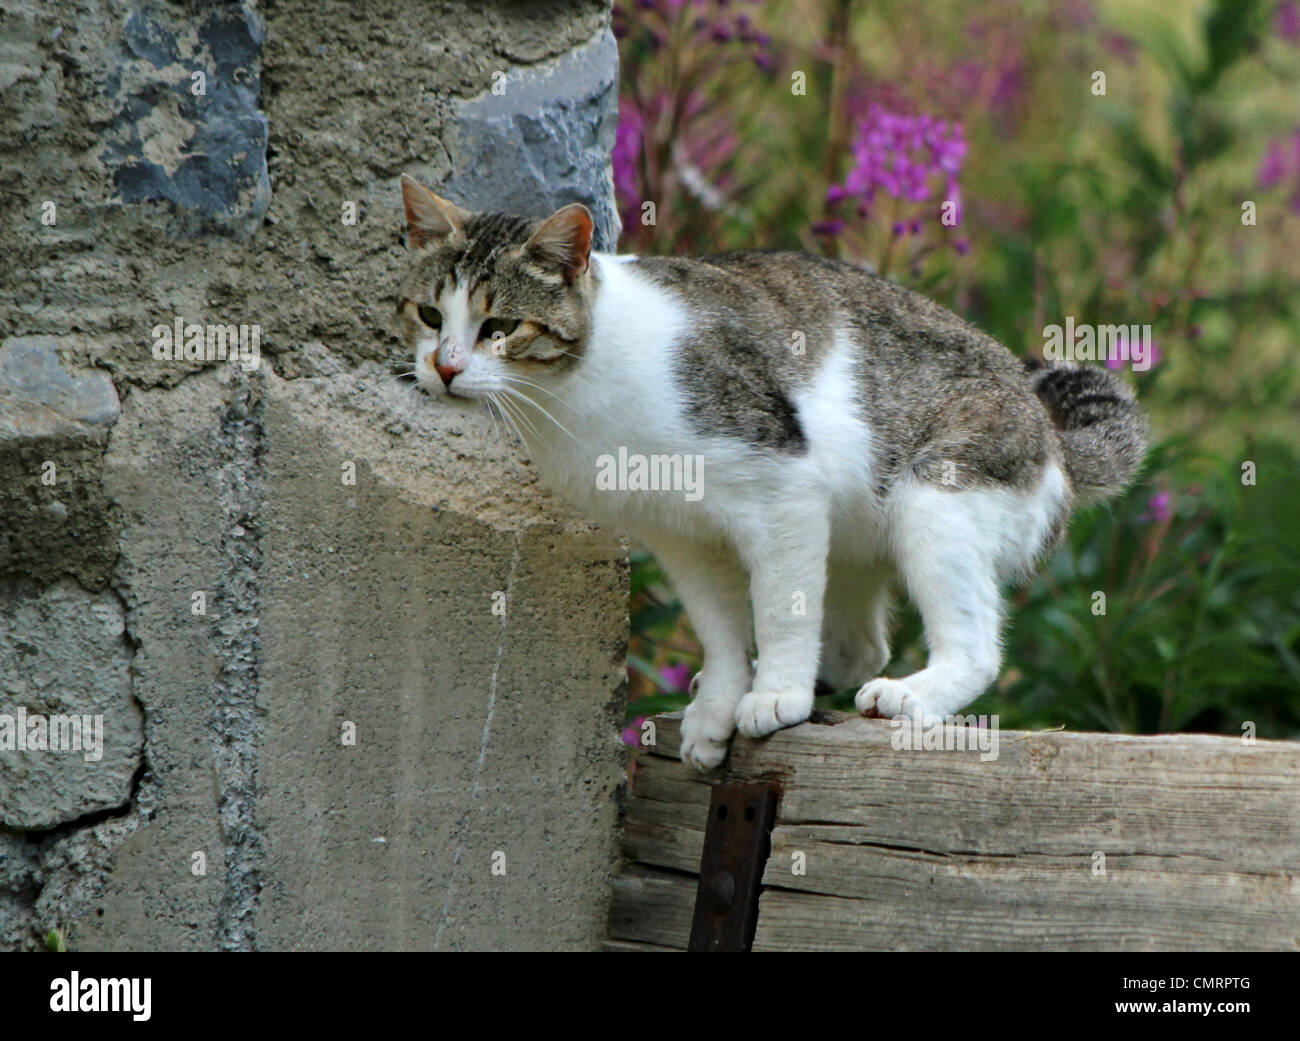 Wild white and grey cat standing on a piece of wood next to a wall and ready to jump Stock Photo